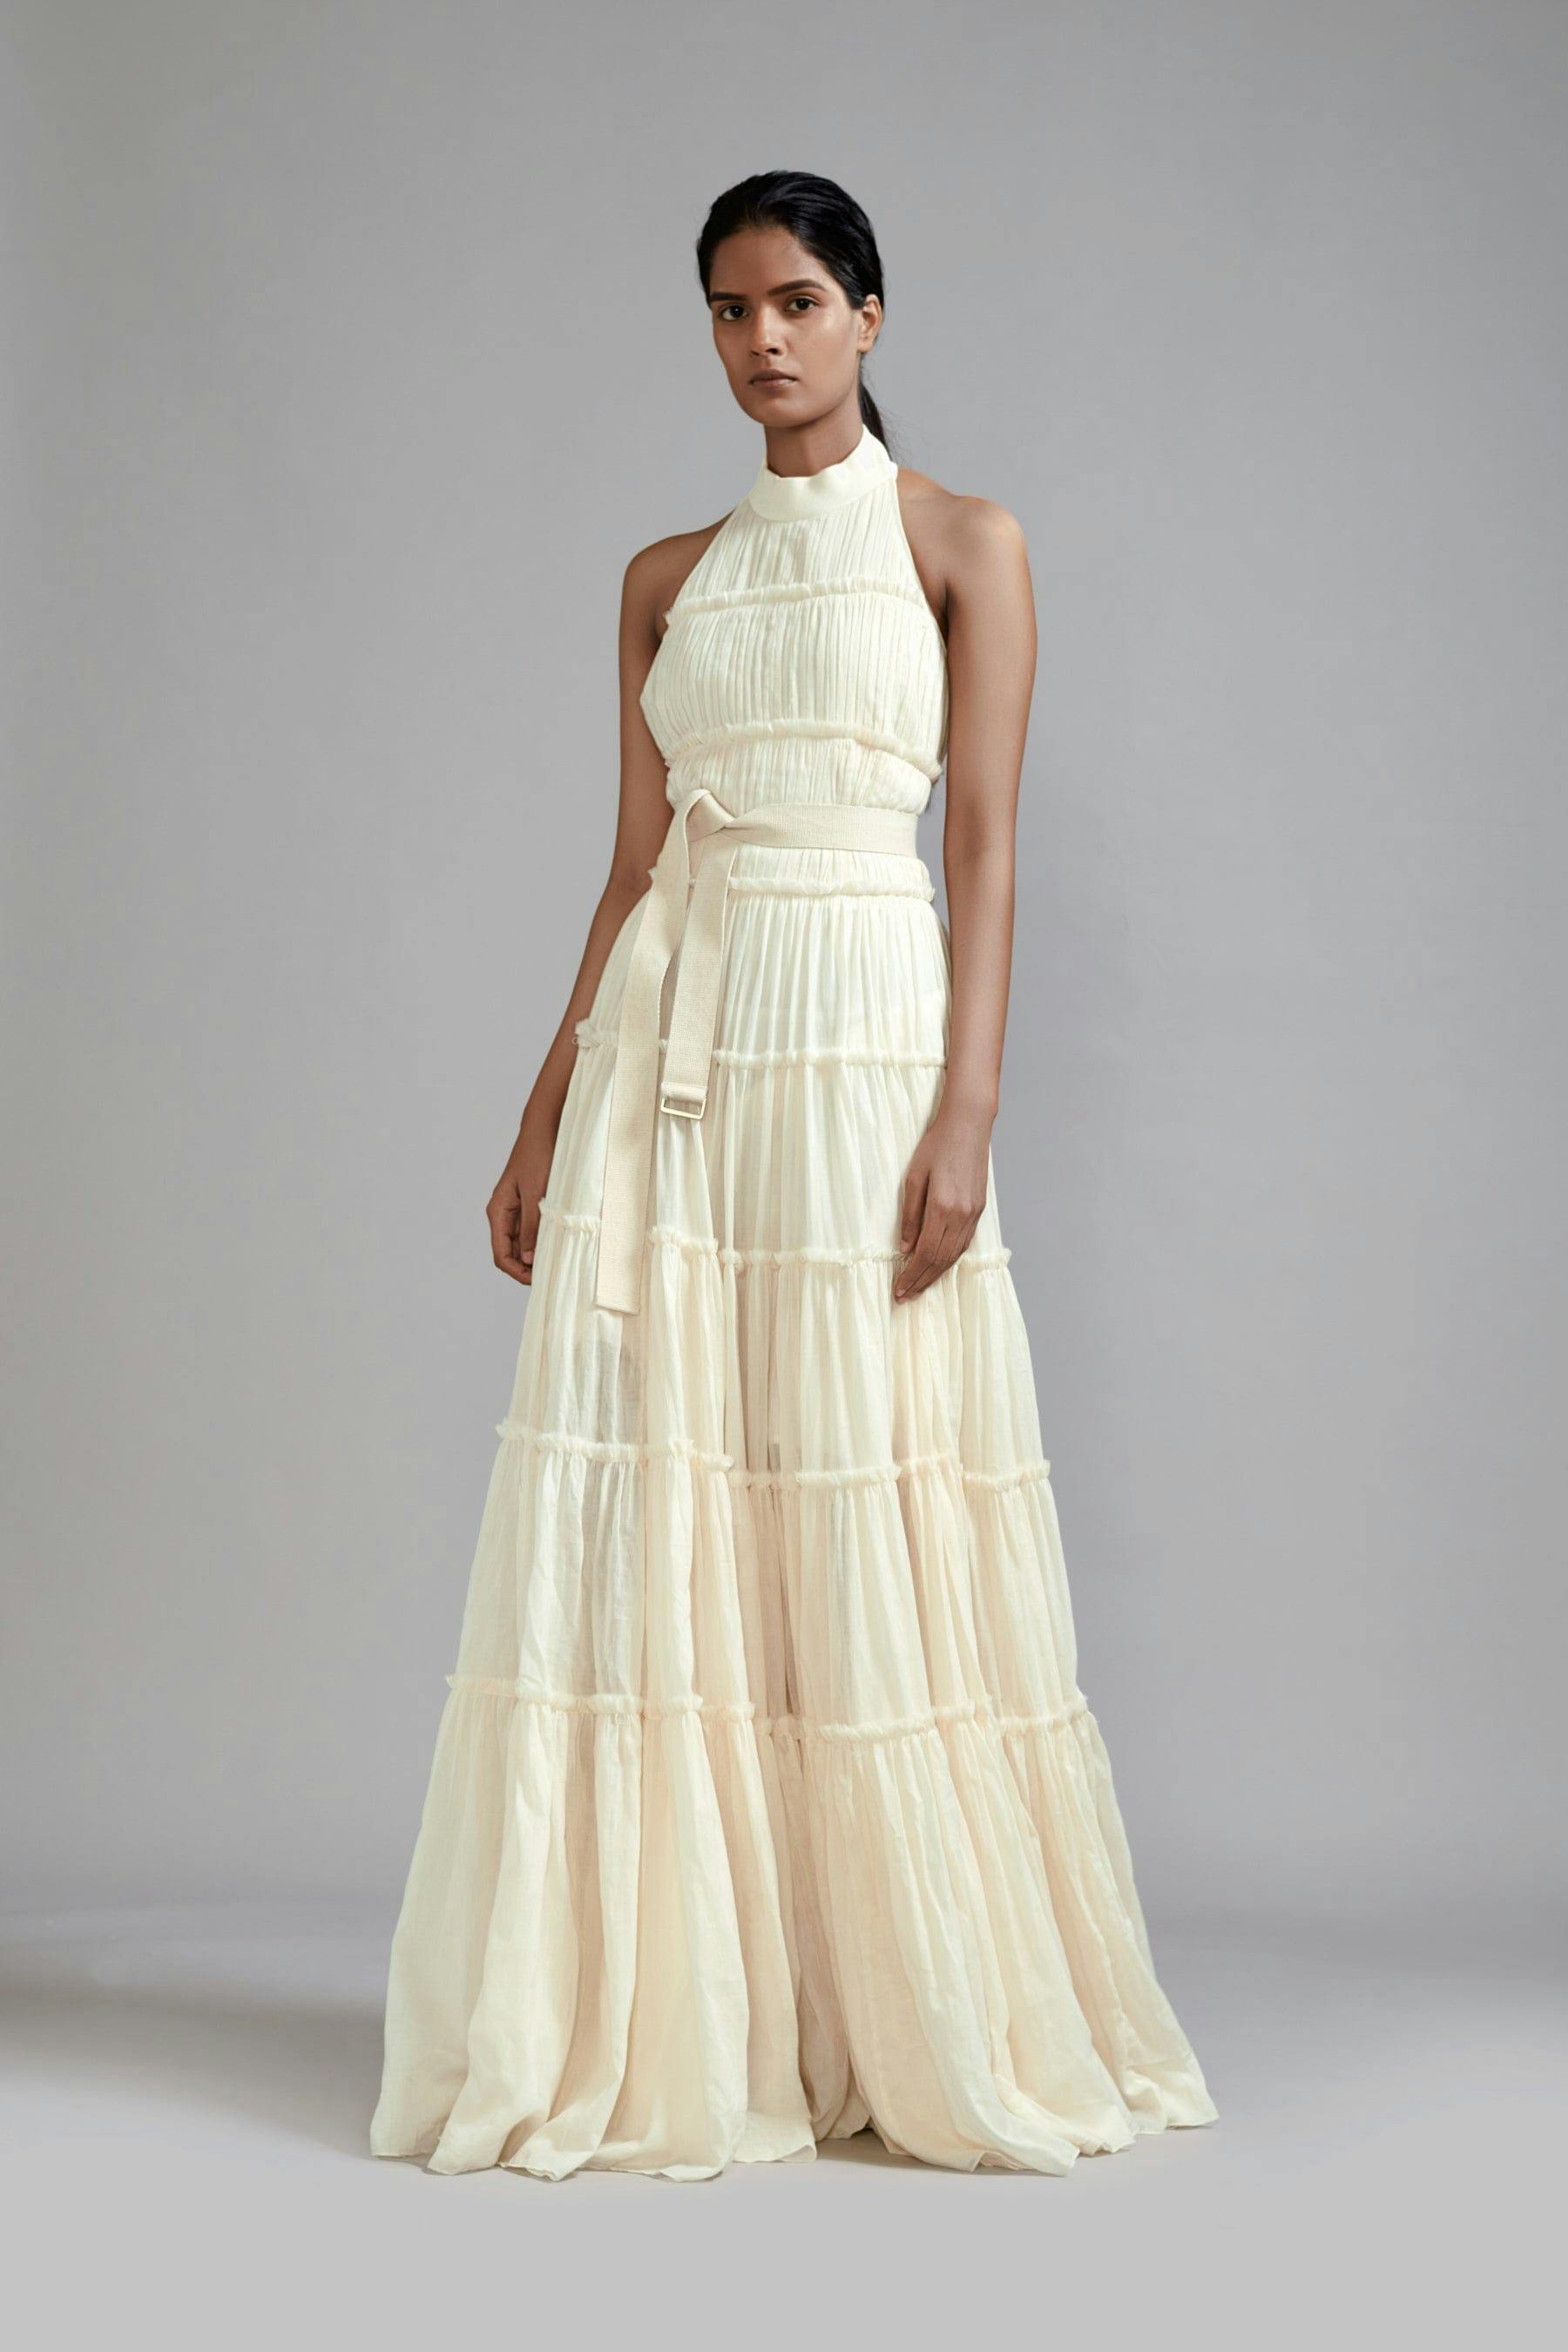 Off-White Backless Tiered Gown, a product by Style Mati